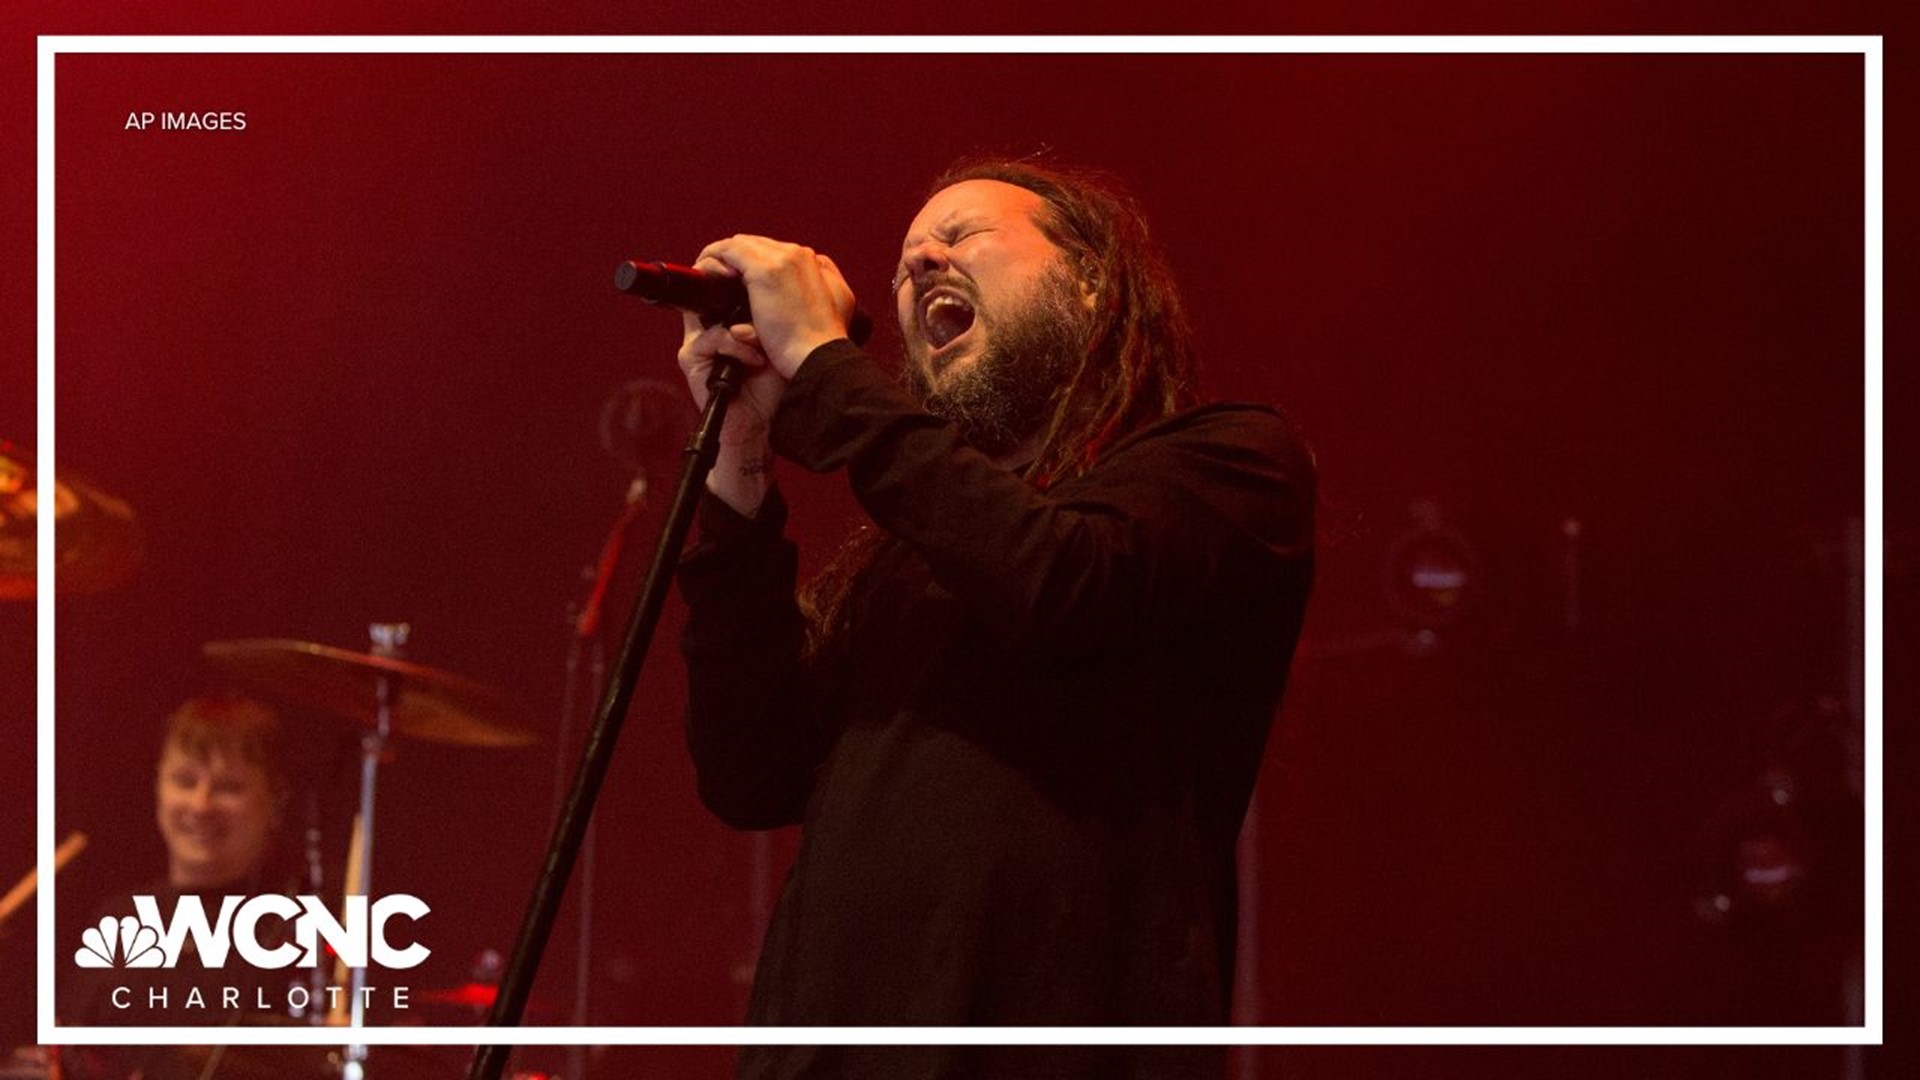 Legendary band Korn is coming to the Queen city. The band announced they are going on tour for their 30th anniversary, performing at the PNC pavilion September 18.